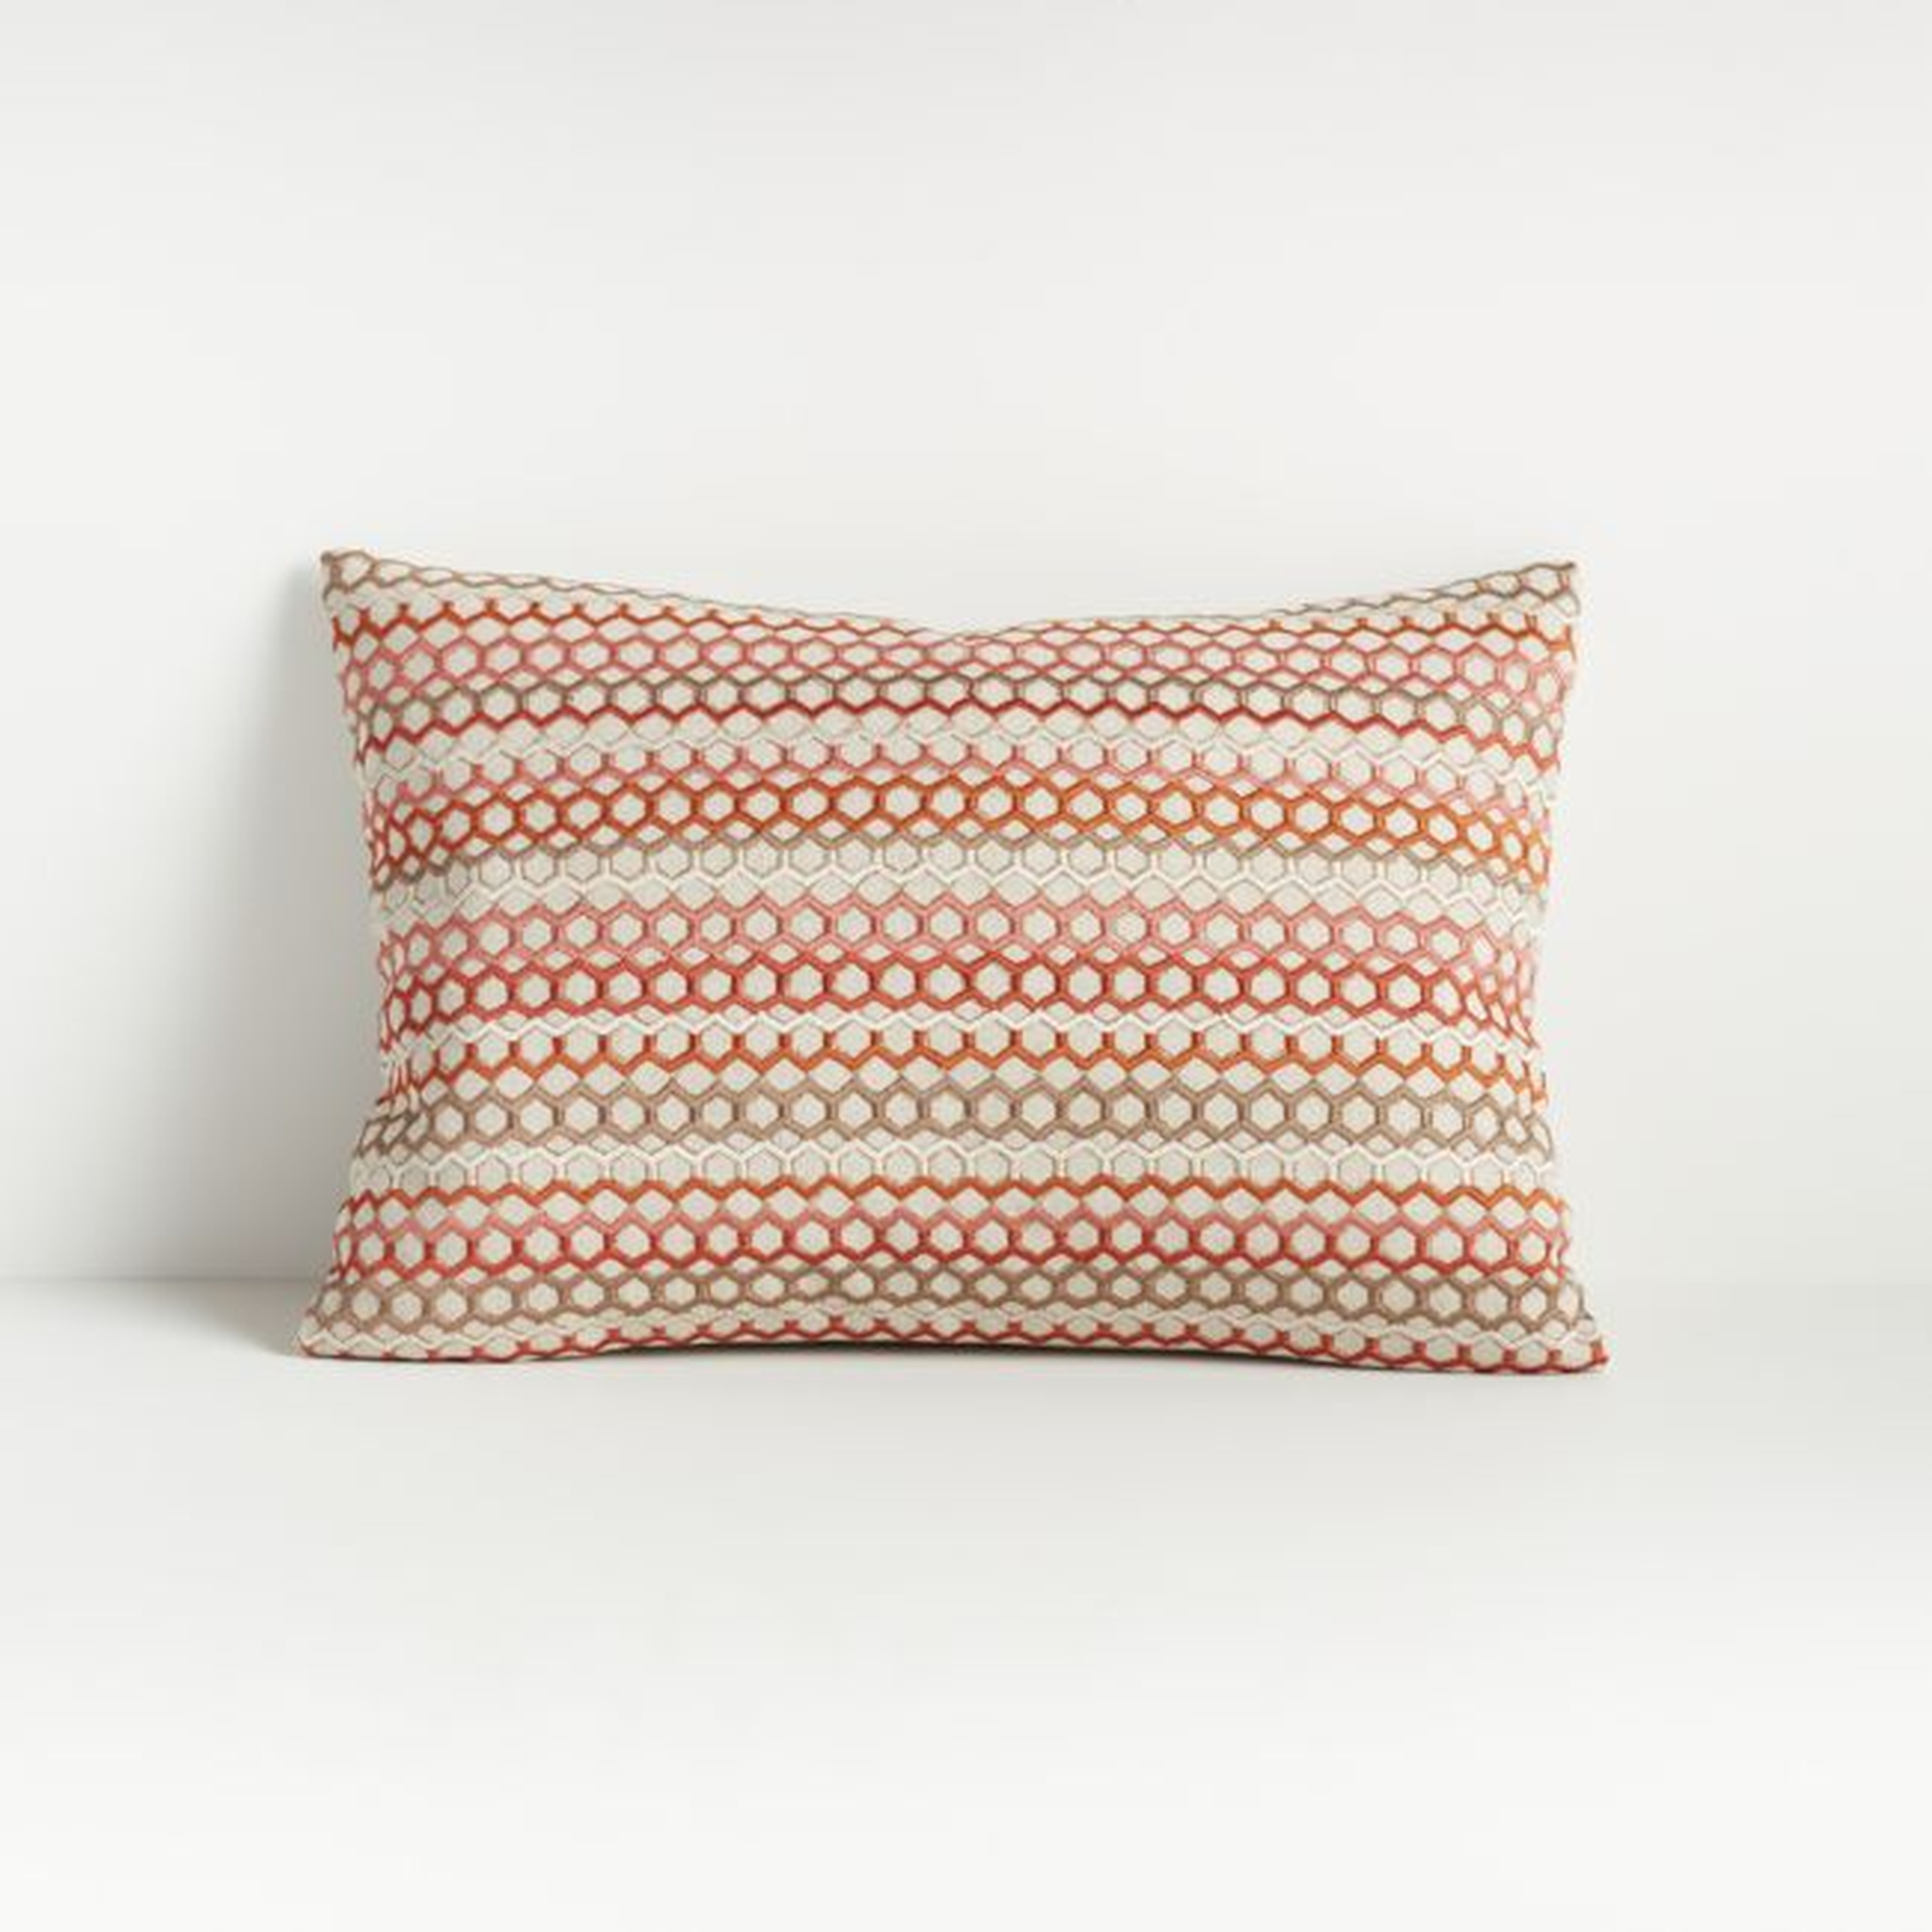 Lesha Embroidered Pillow 12"x18" - Crate and Barrel